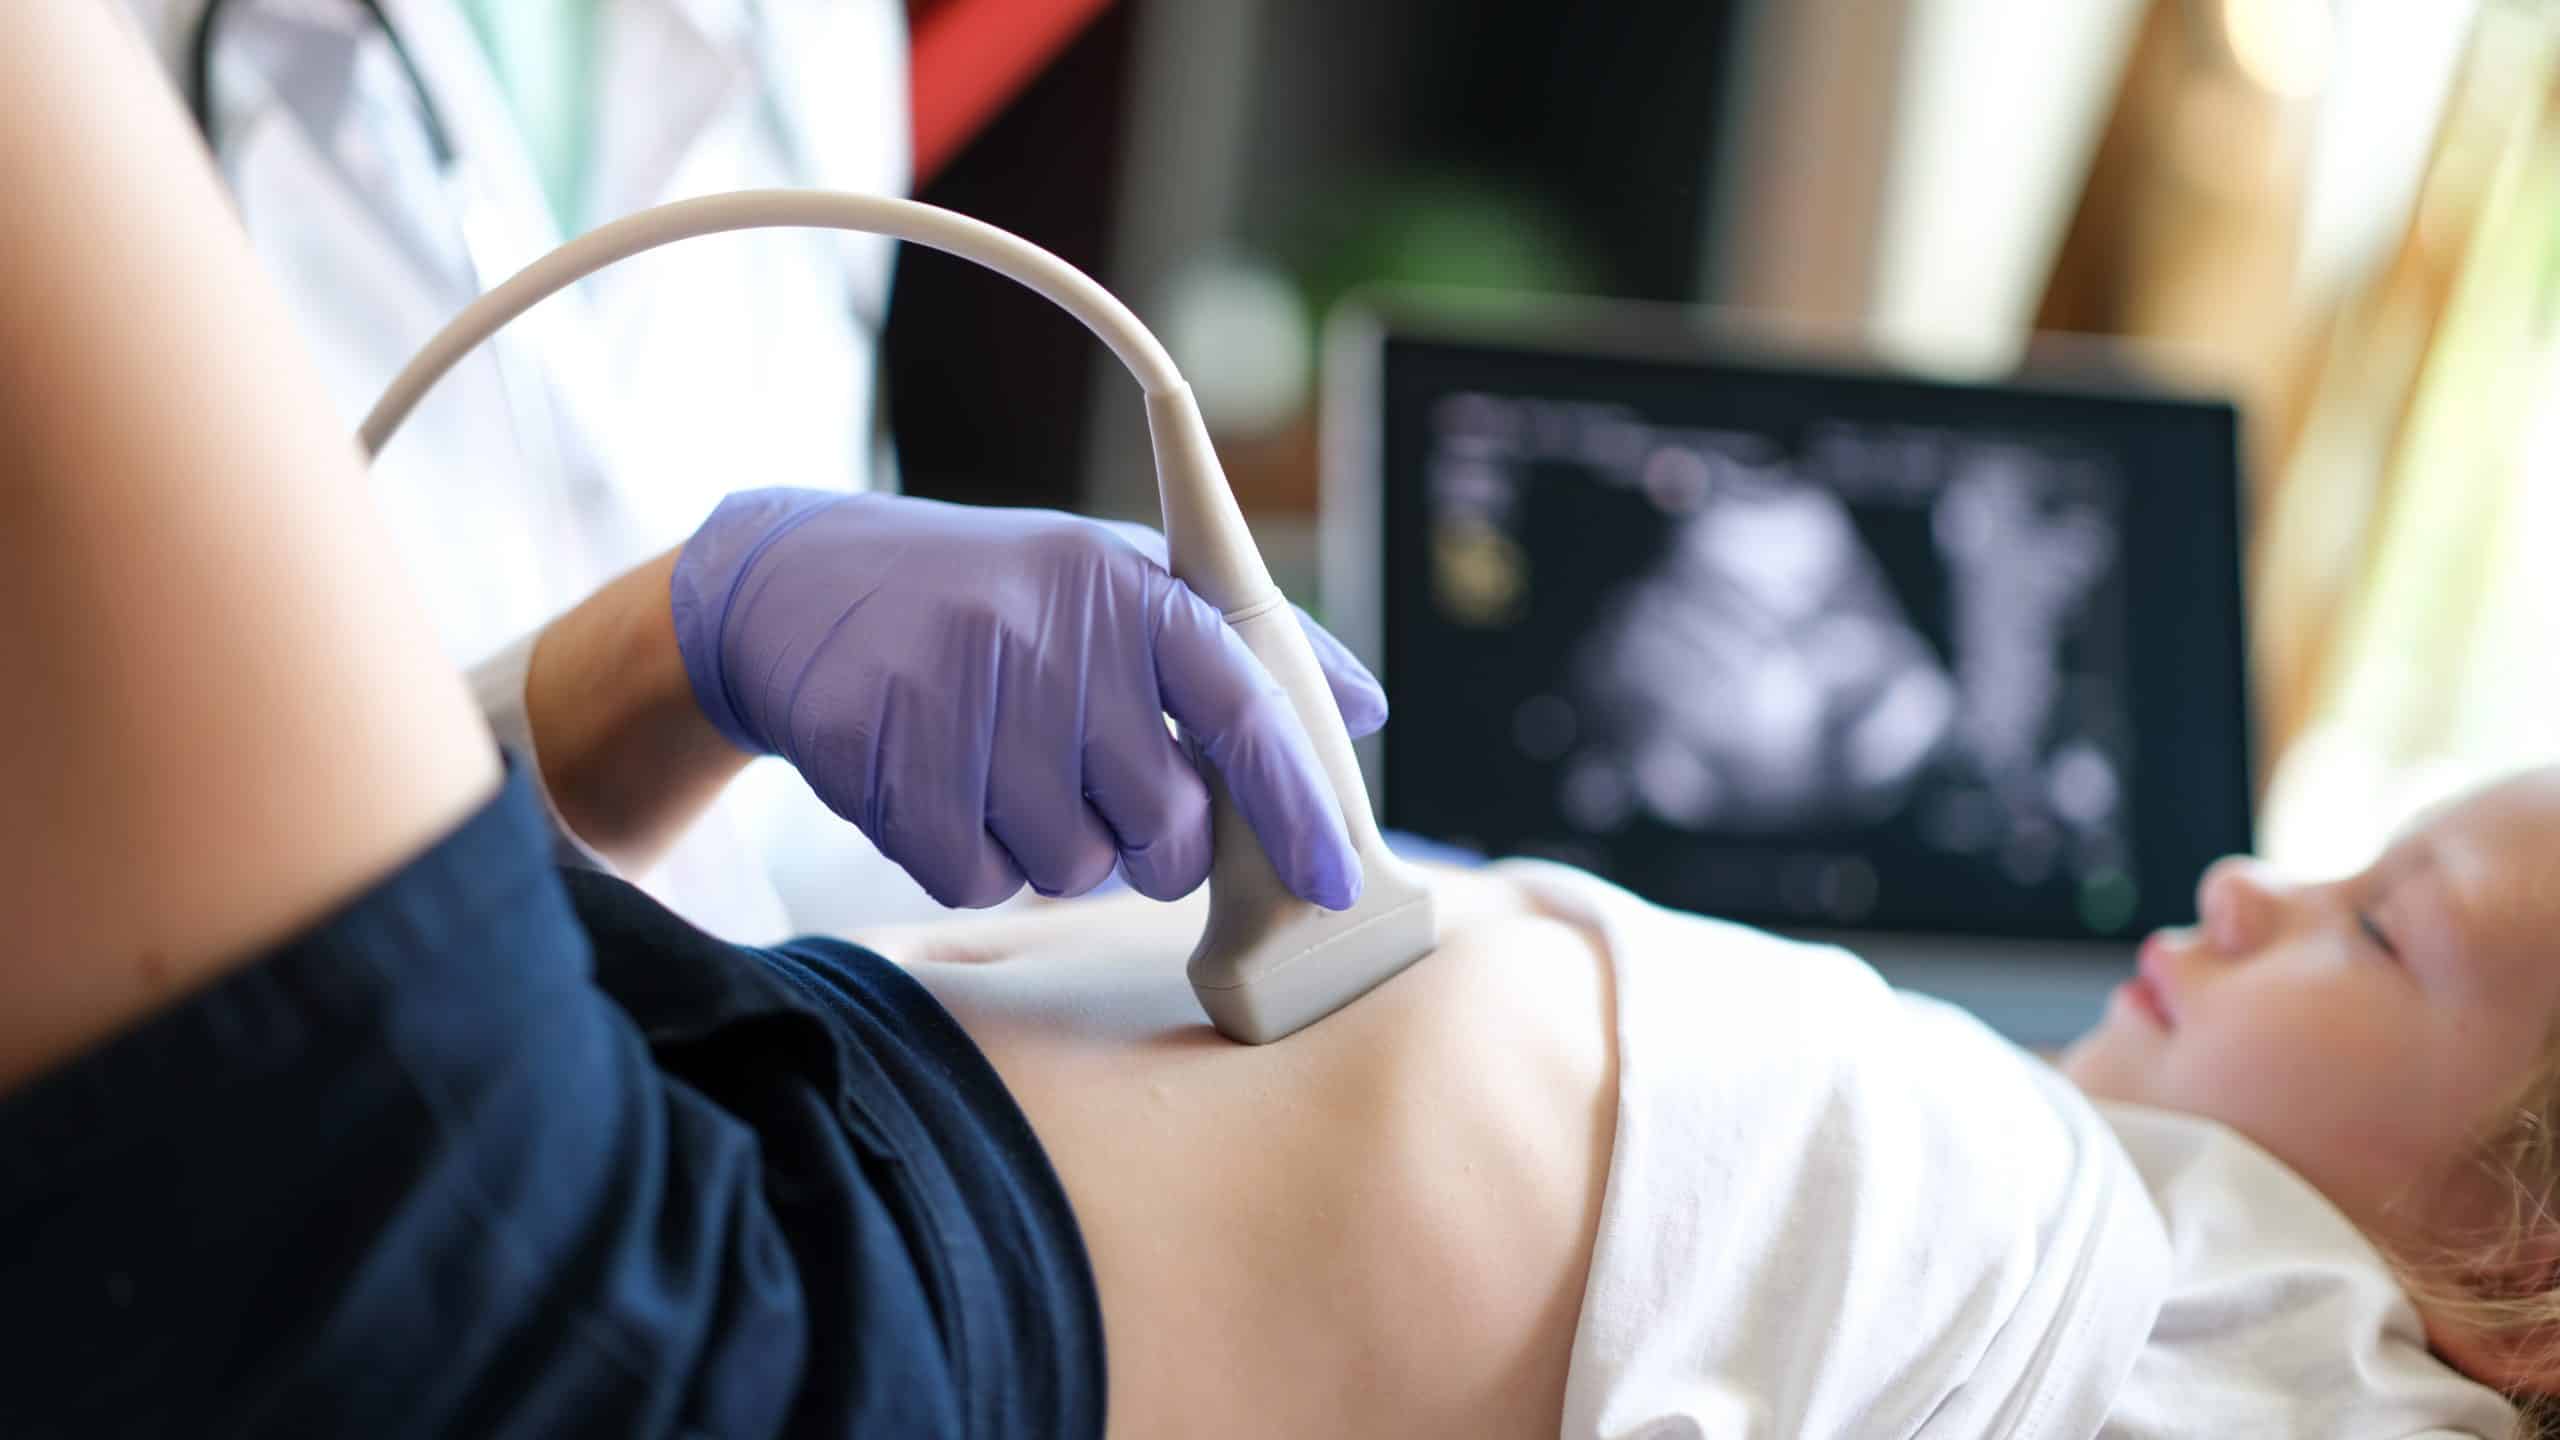 Obstetric ultrasound scaled